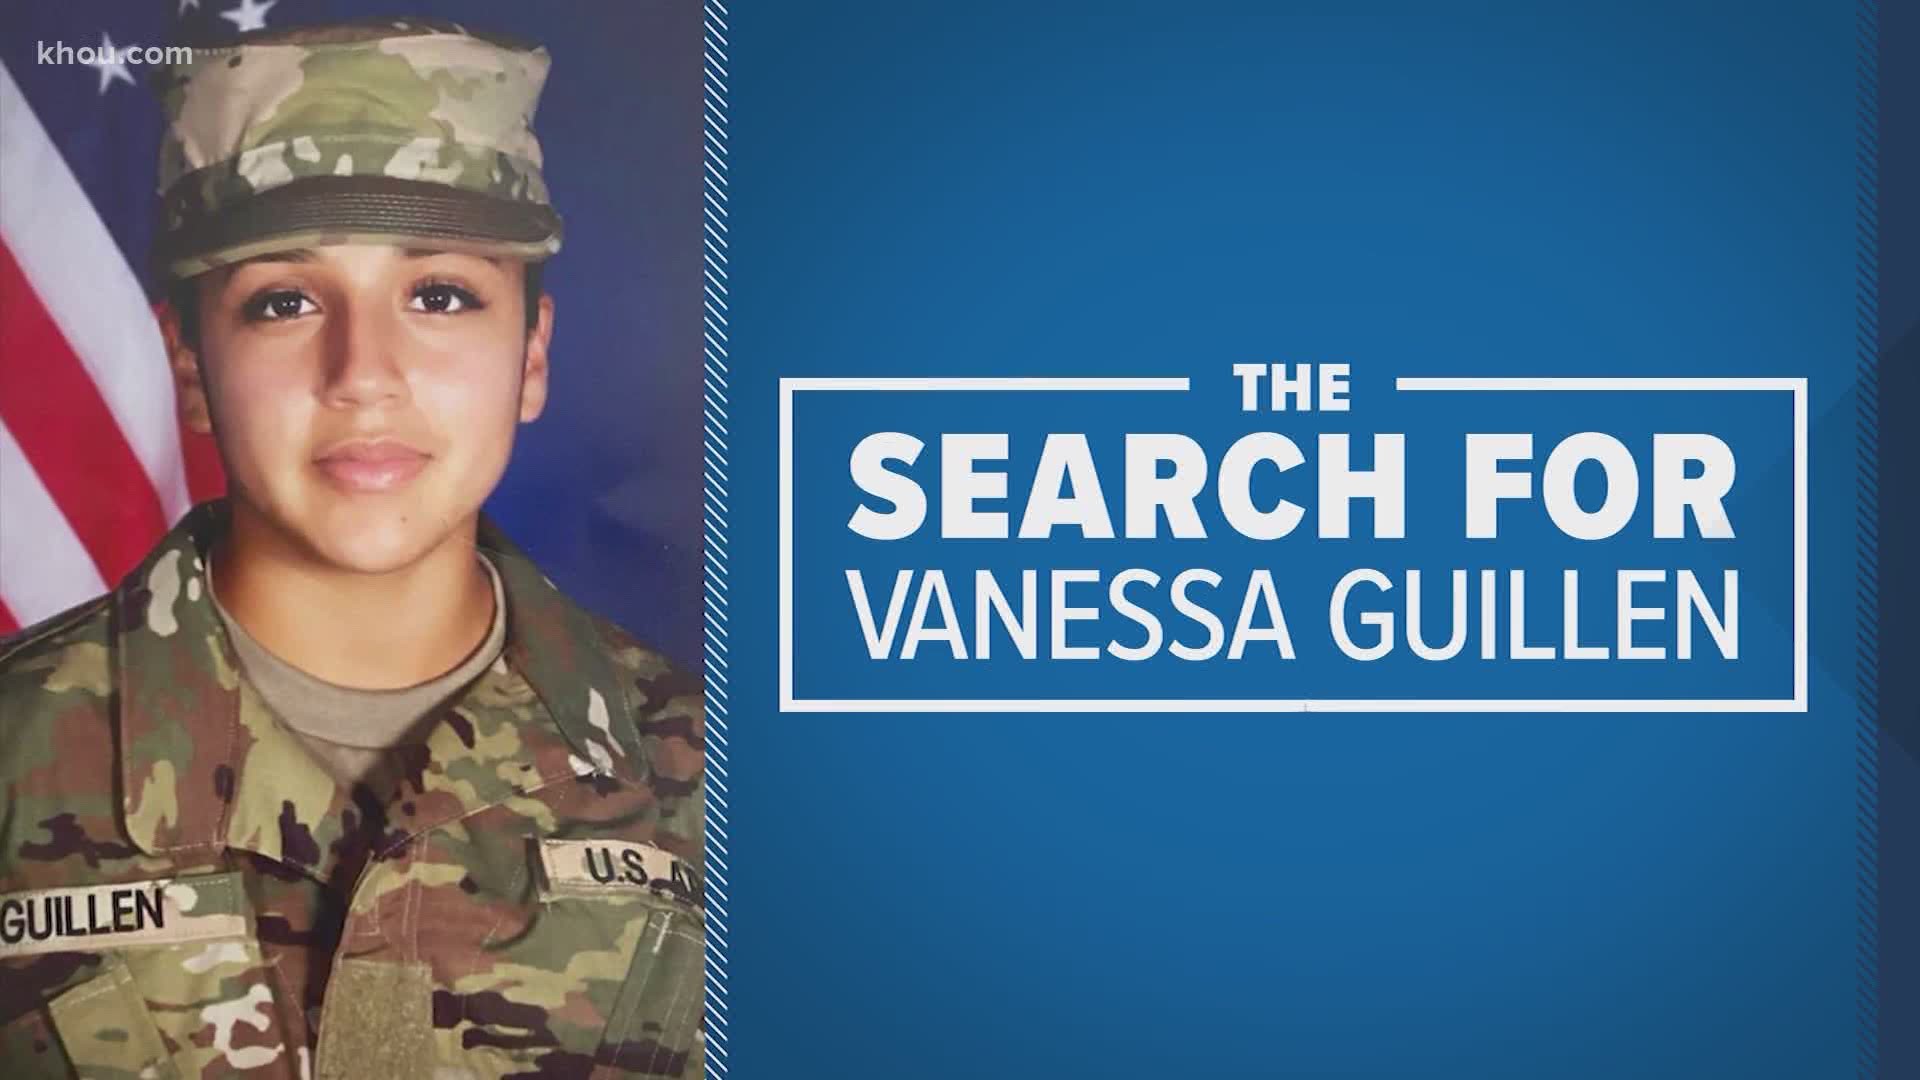 The Army CID said additional information led them back to the area of a search for Vanessa Guillen that was conducted on June 22.